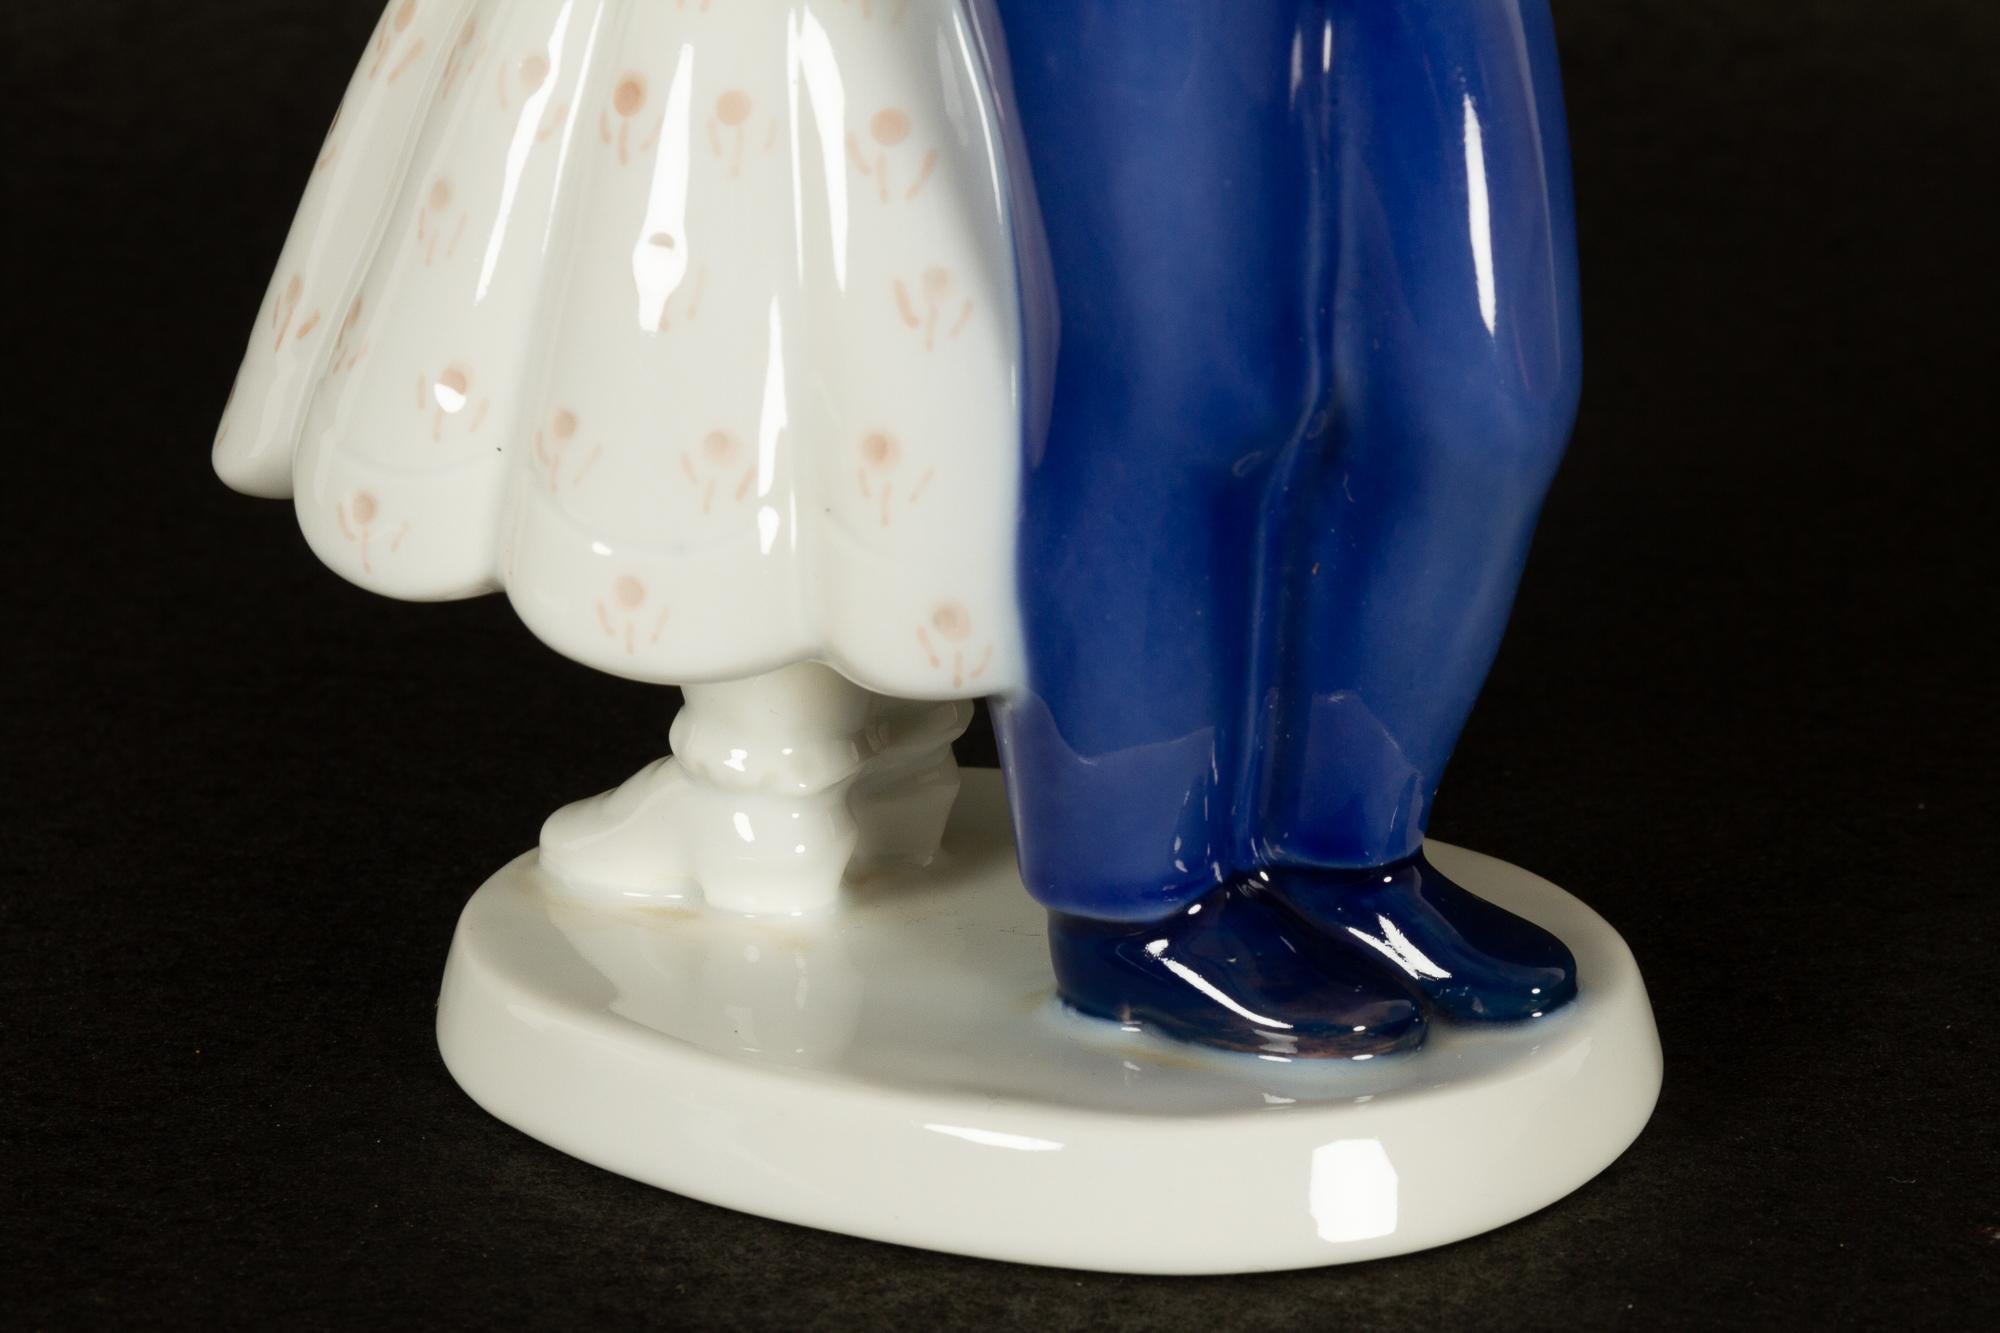 Vintage Danish Porcelain Figurine by Claire Weiss for Bing & Grøndahl, 1970s For Sale 2